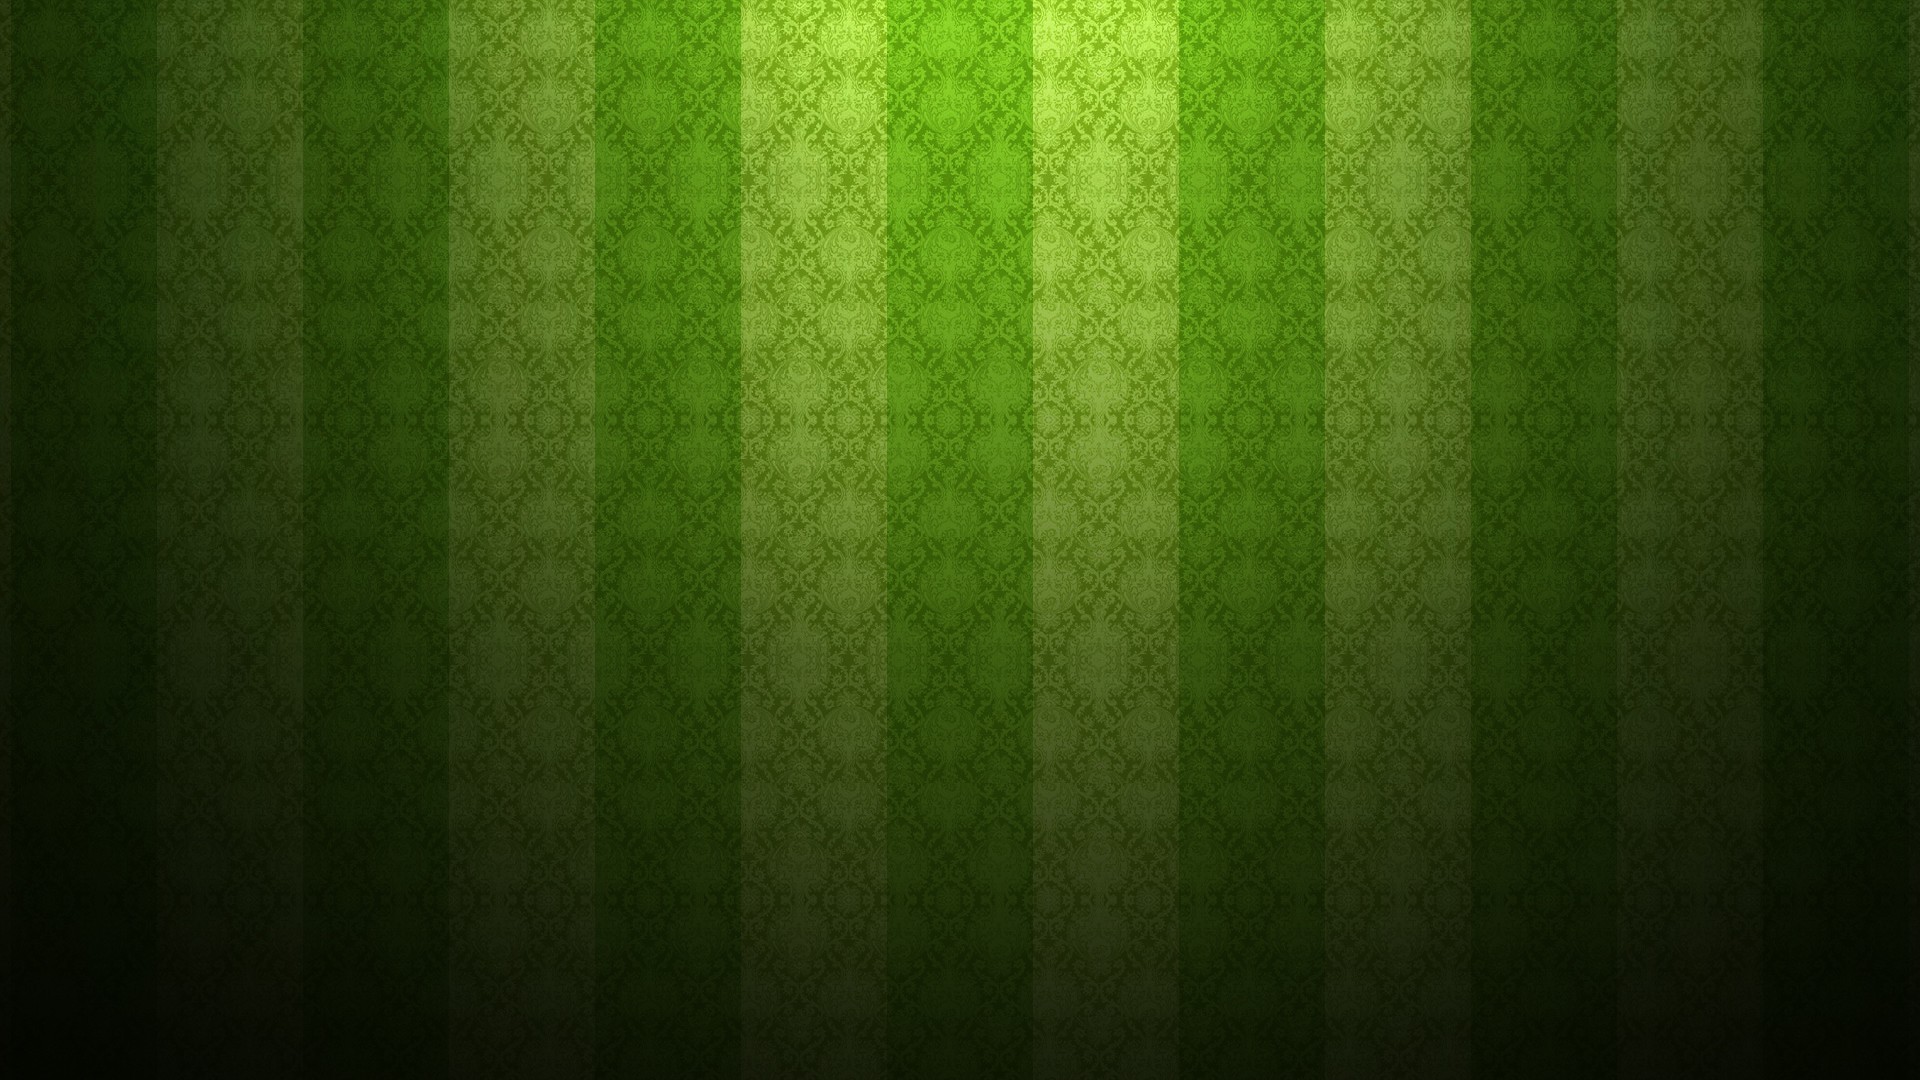 Dark Green Wallpaper HD With Resolution 1920X1080 pixel. You can make this wallpaper for your Desktop Computer Backgrounds, Mac Wallpapers, Android Lock screen or iPhone Screensavers